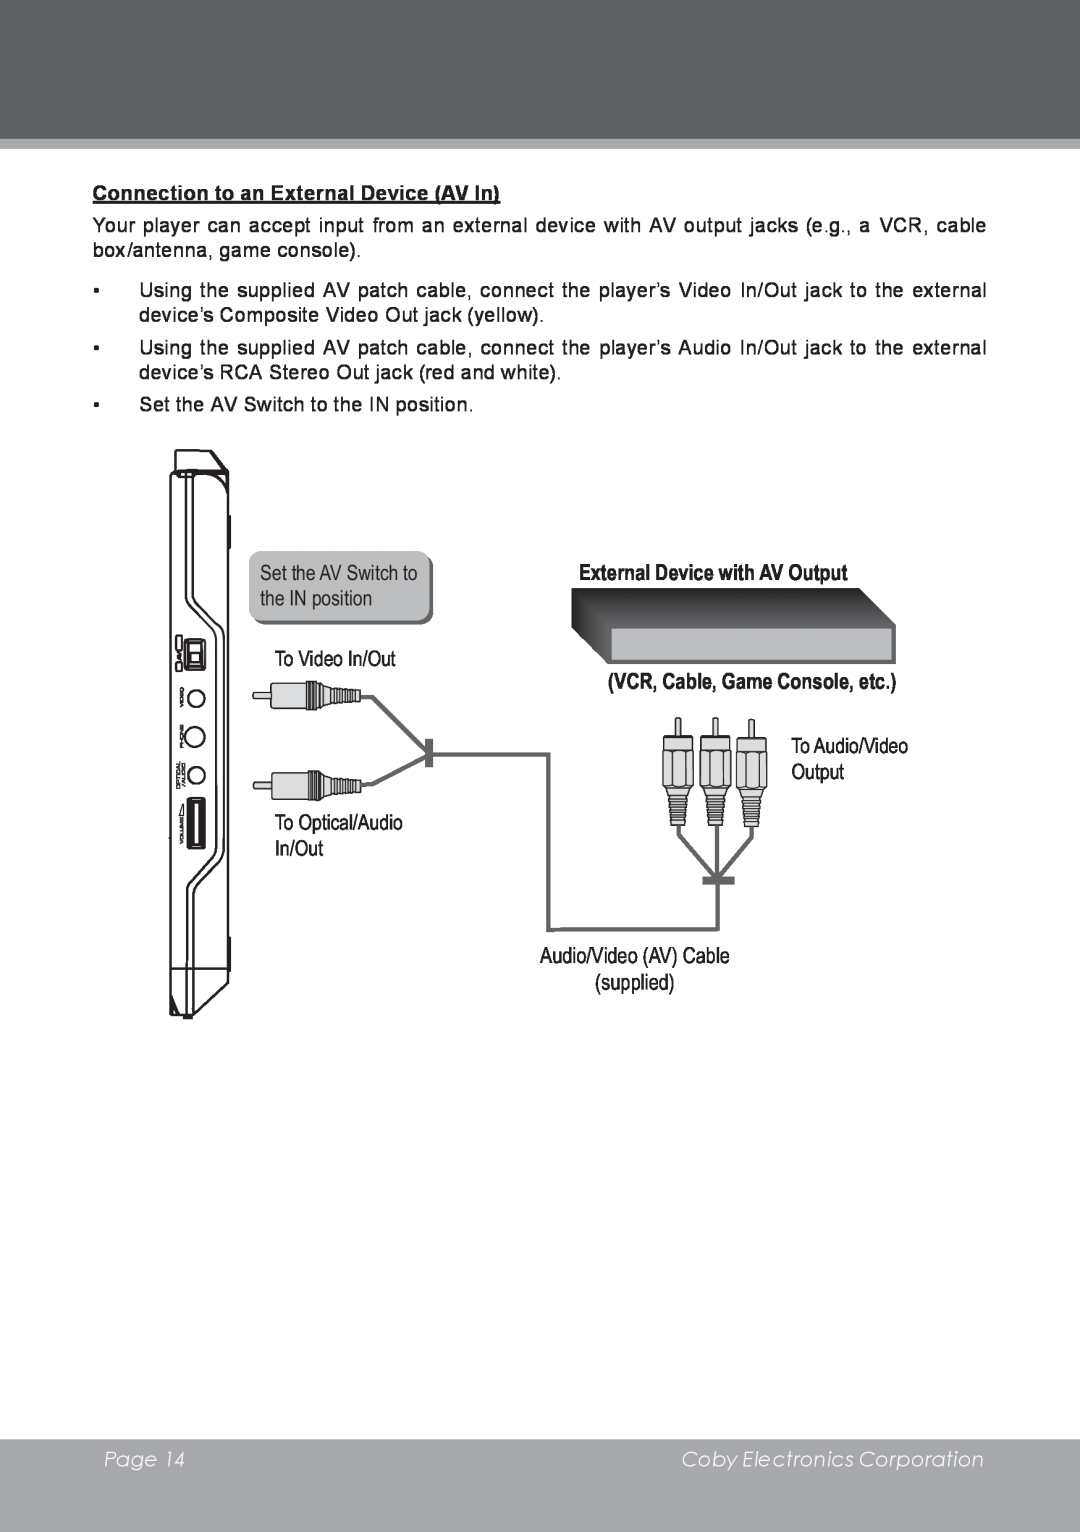 COBY electronic TF-DVD8501 instruction manual Connection to an External Device AV In, External Device with AV Output, Page 